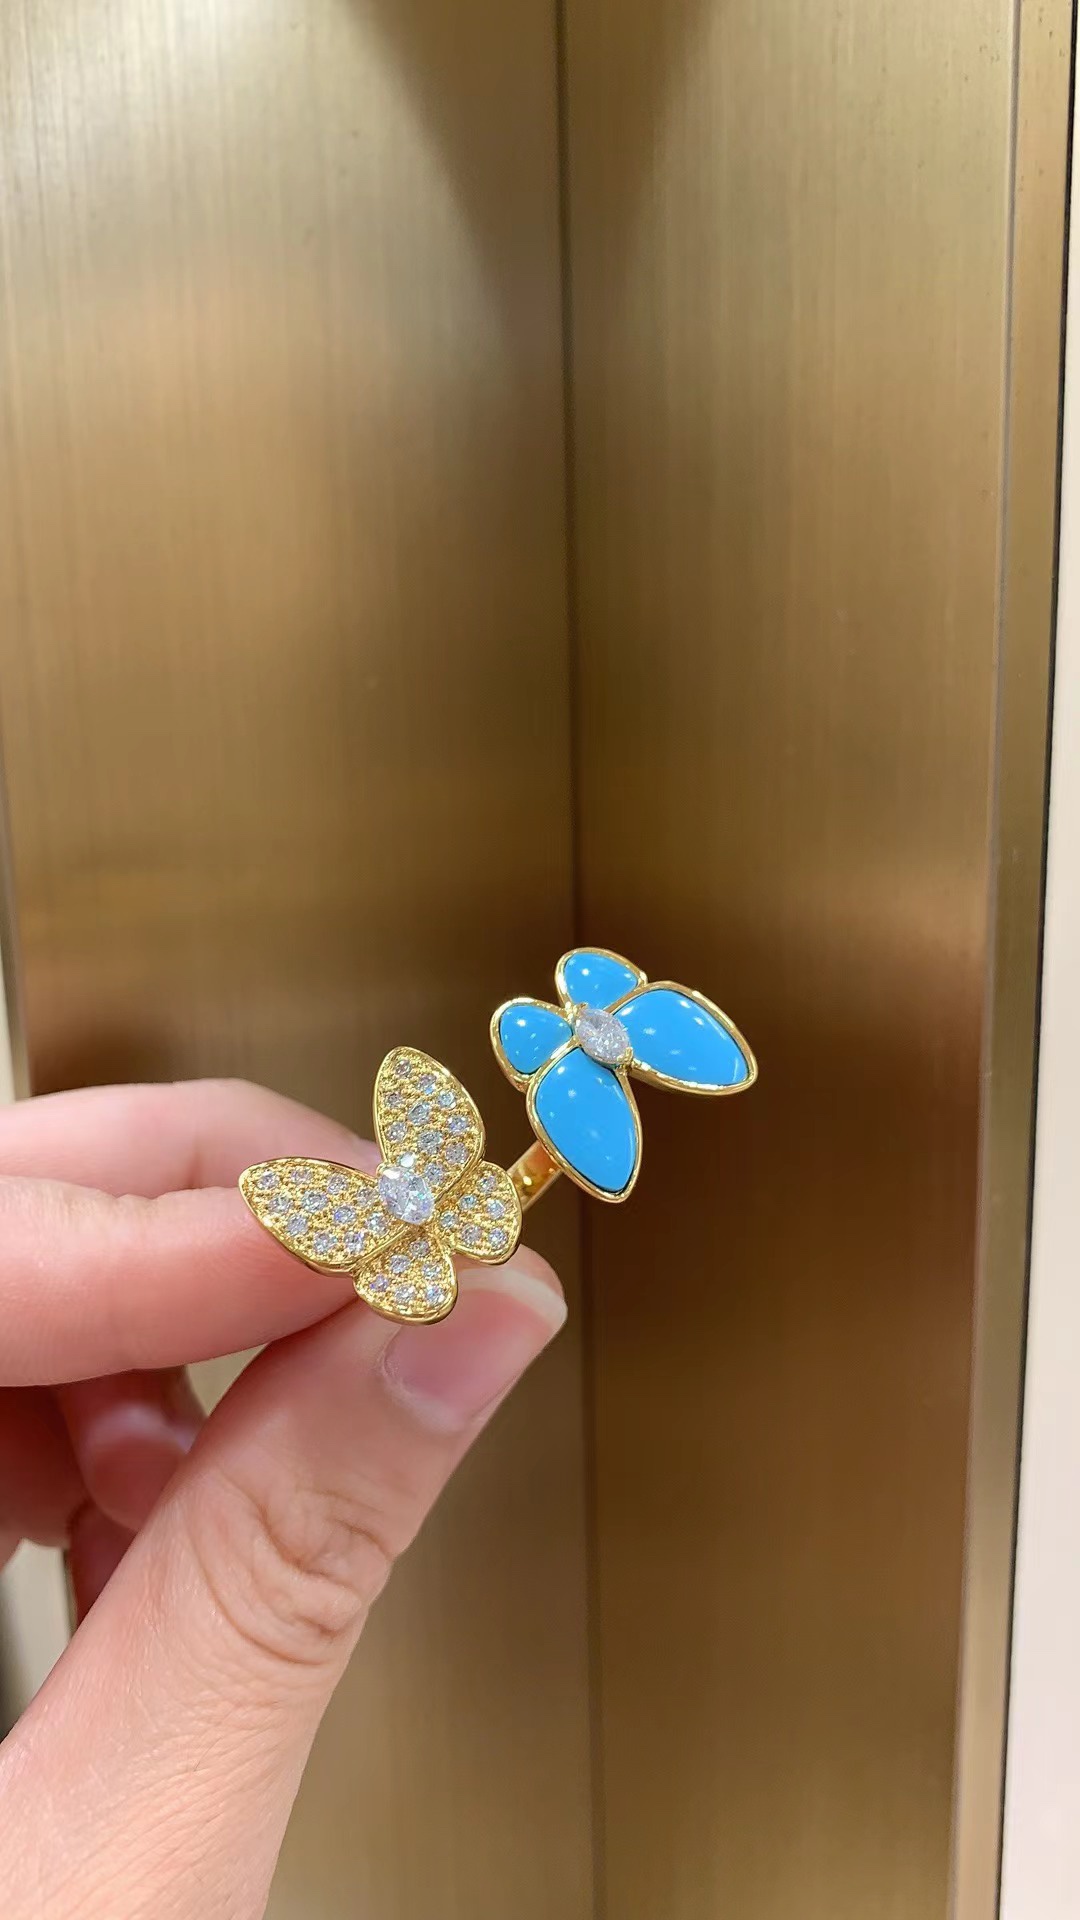 VCA Two Butterfly Between the Finger ring
yellow gold, Diamond, Turquoise